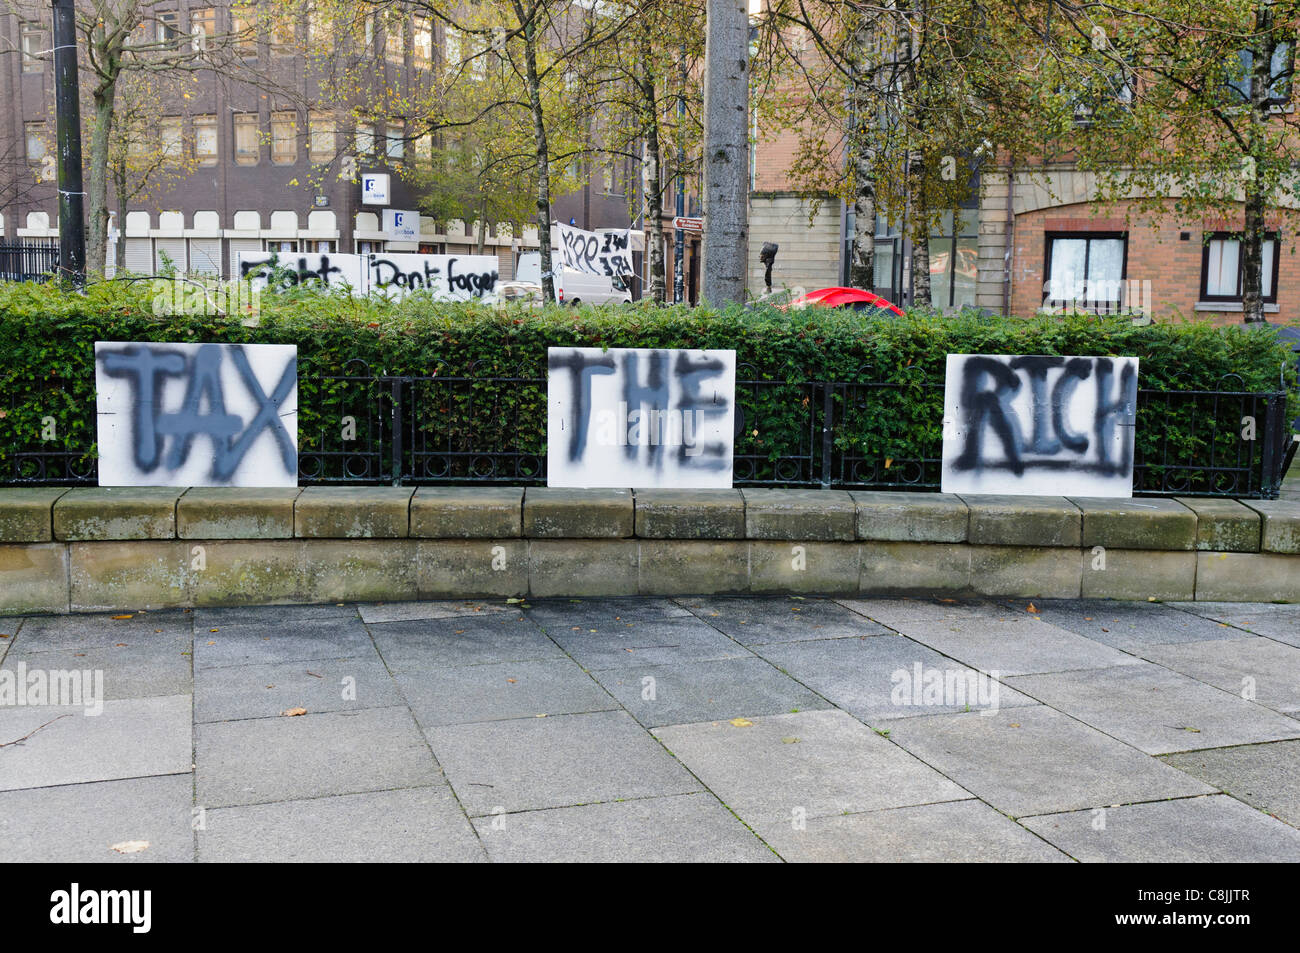 Belfast, UK, 26/10/2011. Sign calling for governments to tax the rich at Occupy Belfast protest. Stock Photo